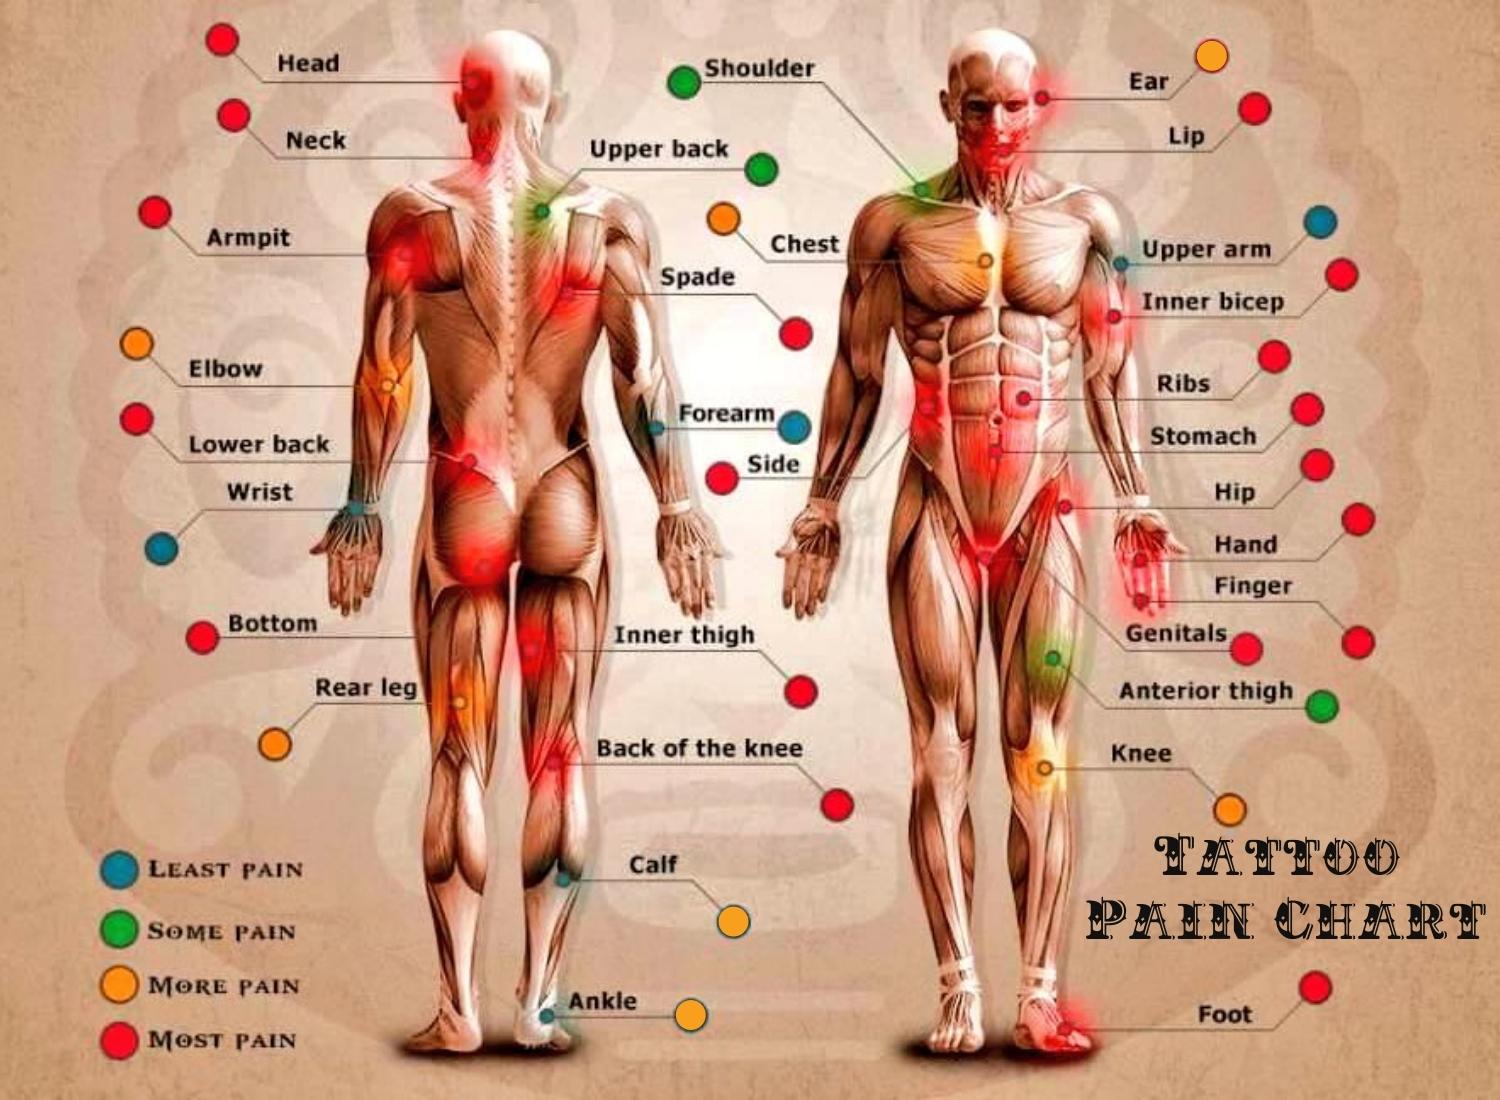 Tattoo Pain Chart For MaleFemale Unique Body Parts With Indicators